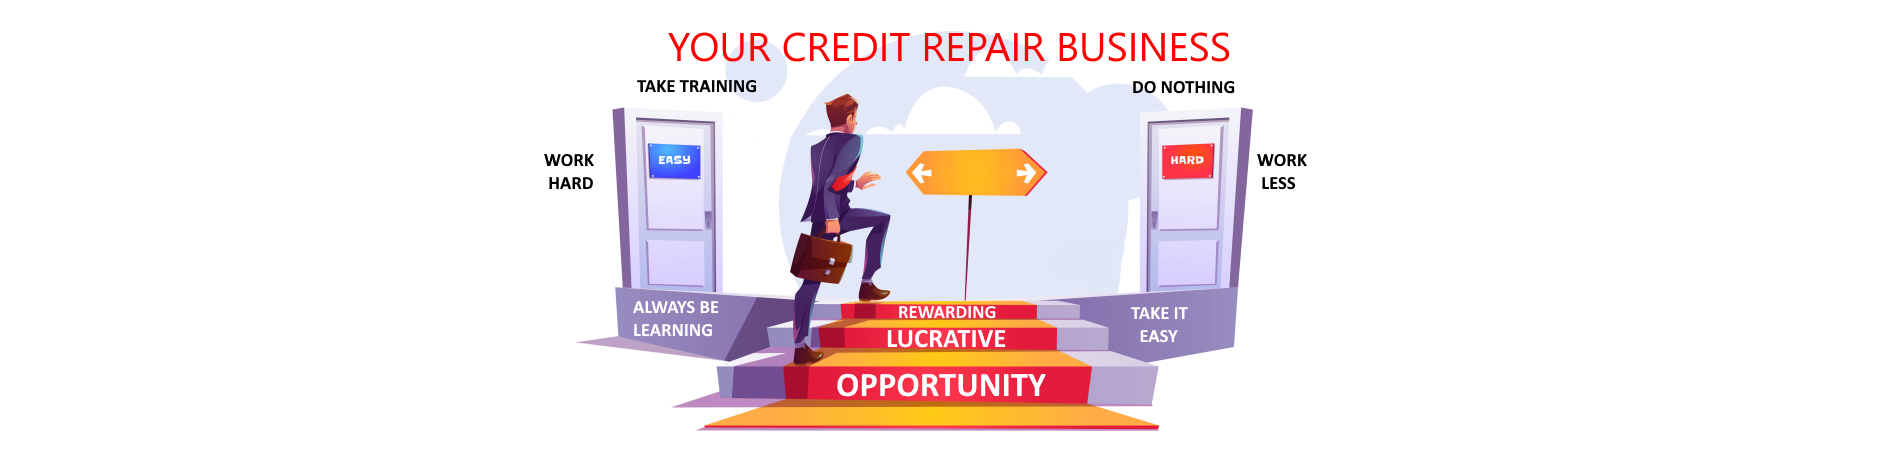 Credit repair is a rewarding and lucrative business opportunity